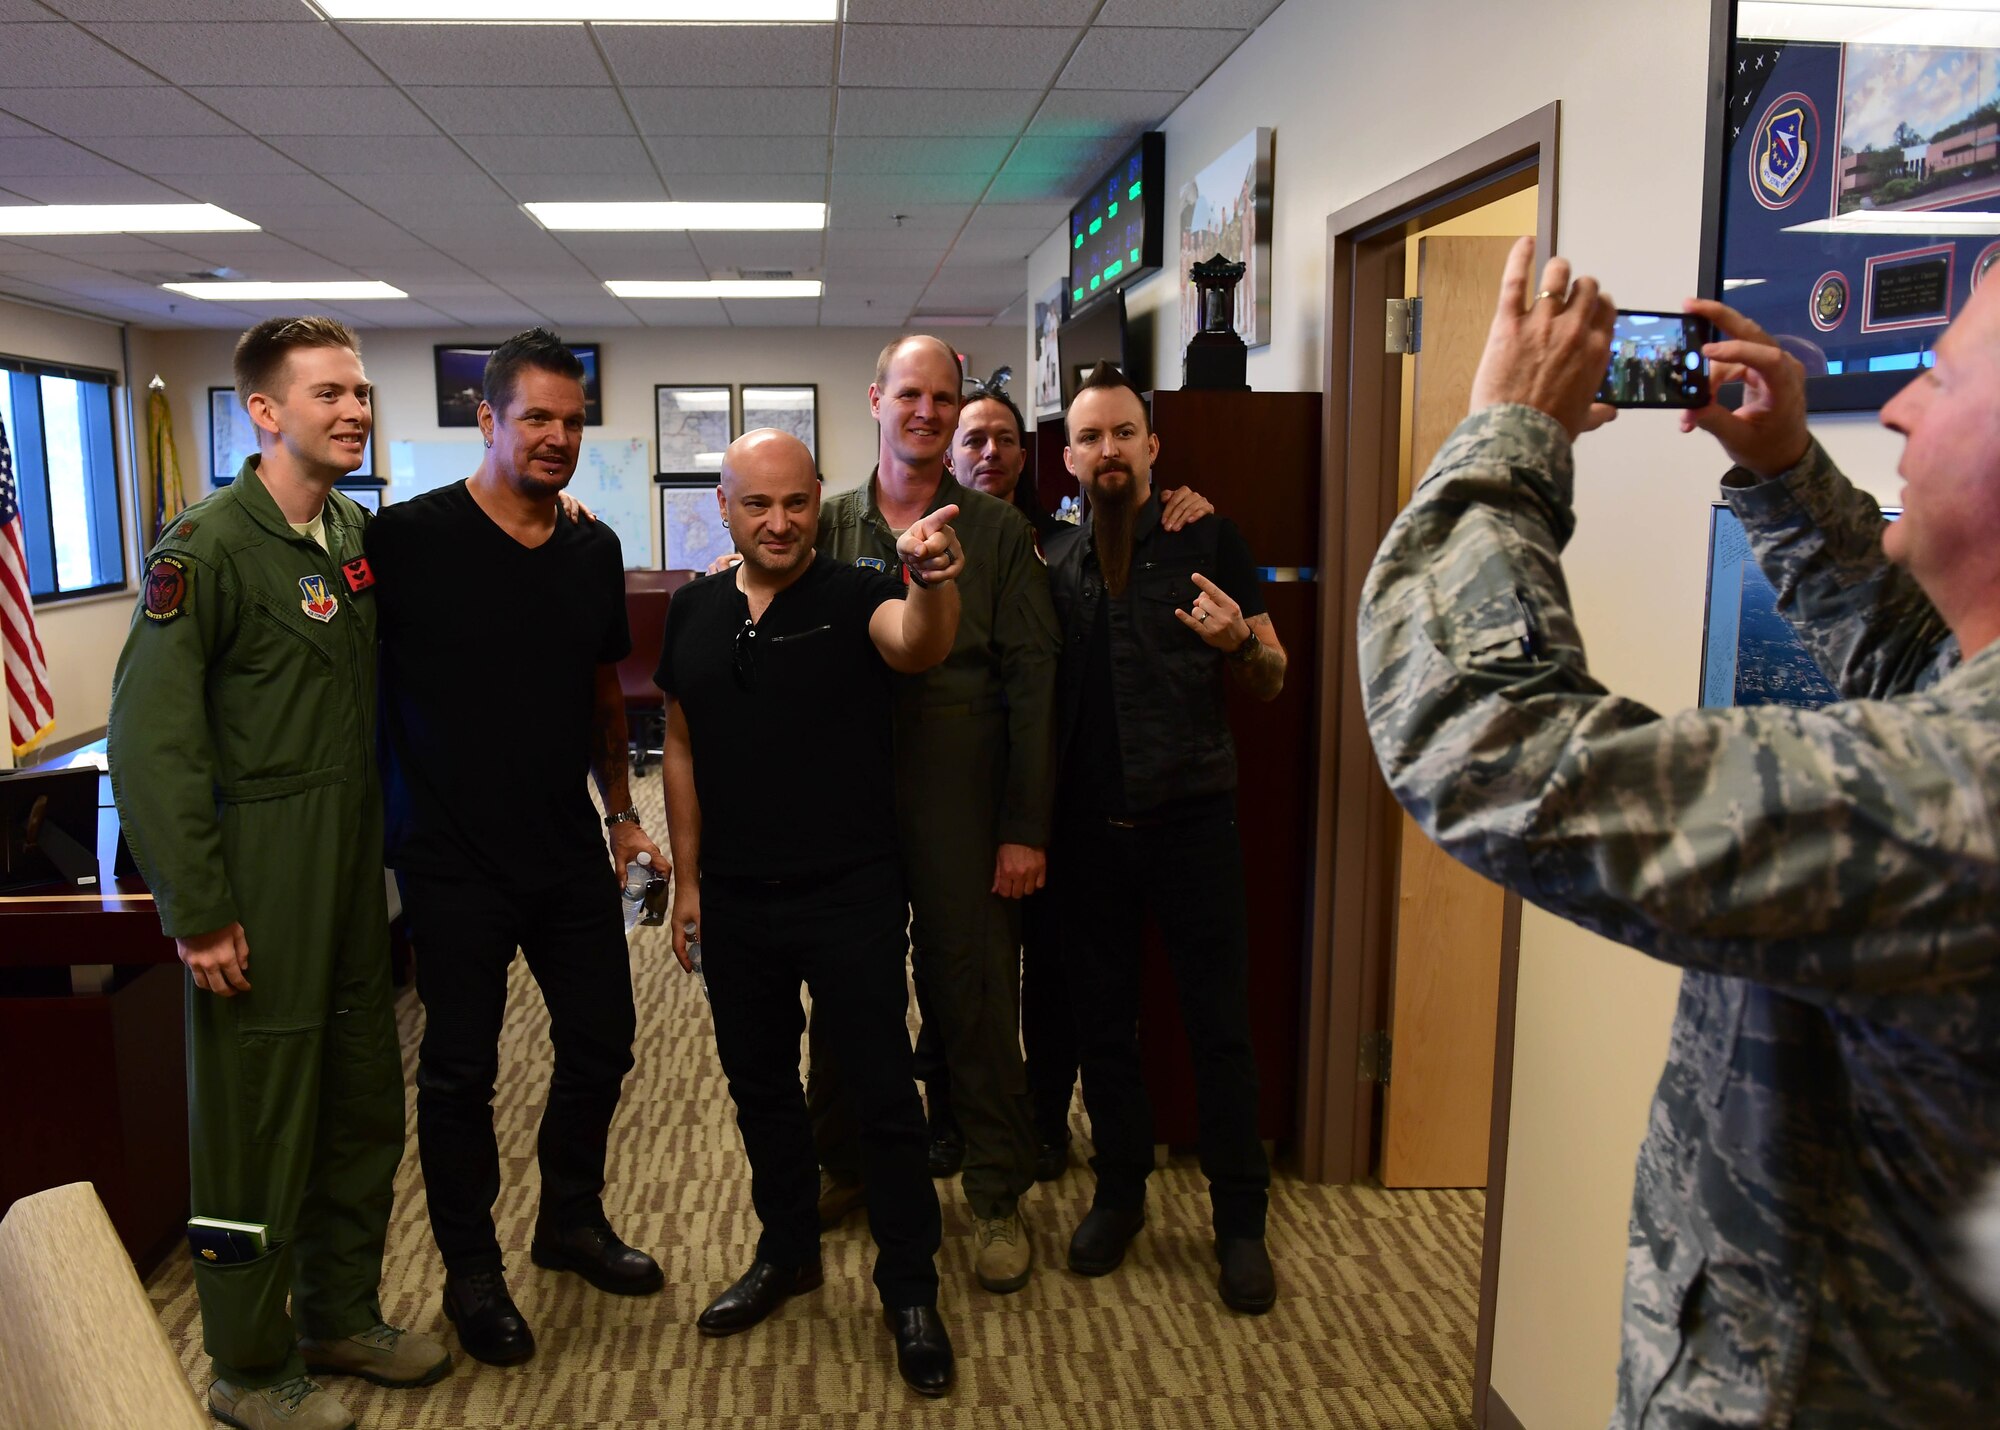 Disturbed band members take a photo with 432nd Wing/432nd Expeditionary Wing pilots in wing headquarters at Creech Air Force Base, Nevada, Oct. 23, 2018. Disturbed came to Creech via the USO and performed a concert for Airmen after learning about the wing mission. (U.S. Air Force photo by Senior Airman Christian Clausen)